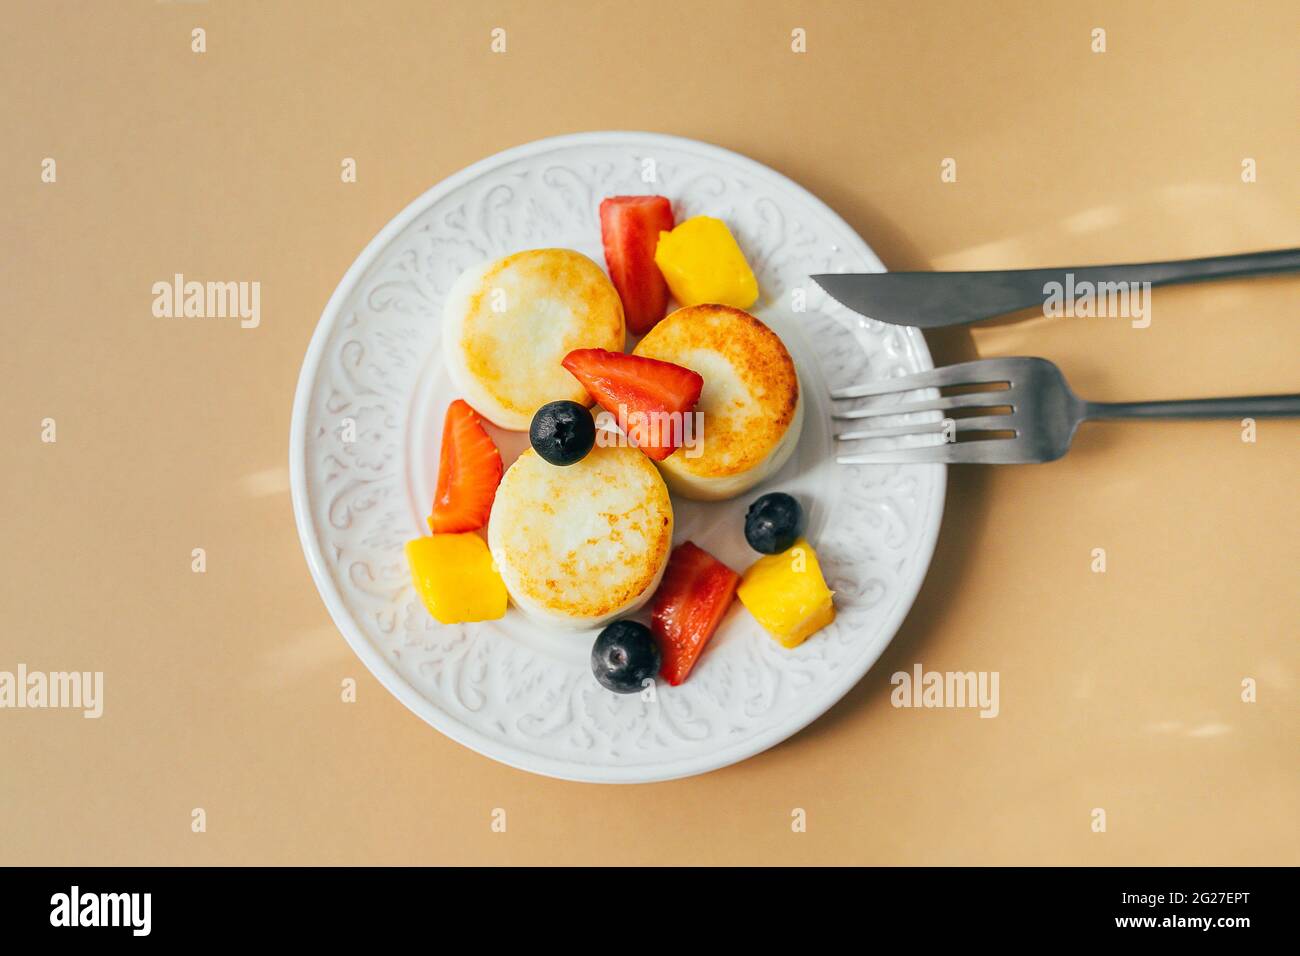 Breakfast food concept. Cottage cheese pancakes on plate. Syrniki with berry, top view. Stock Photo